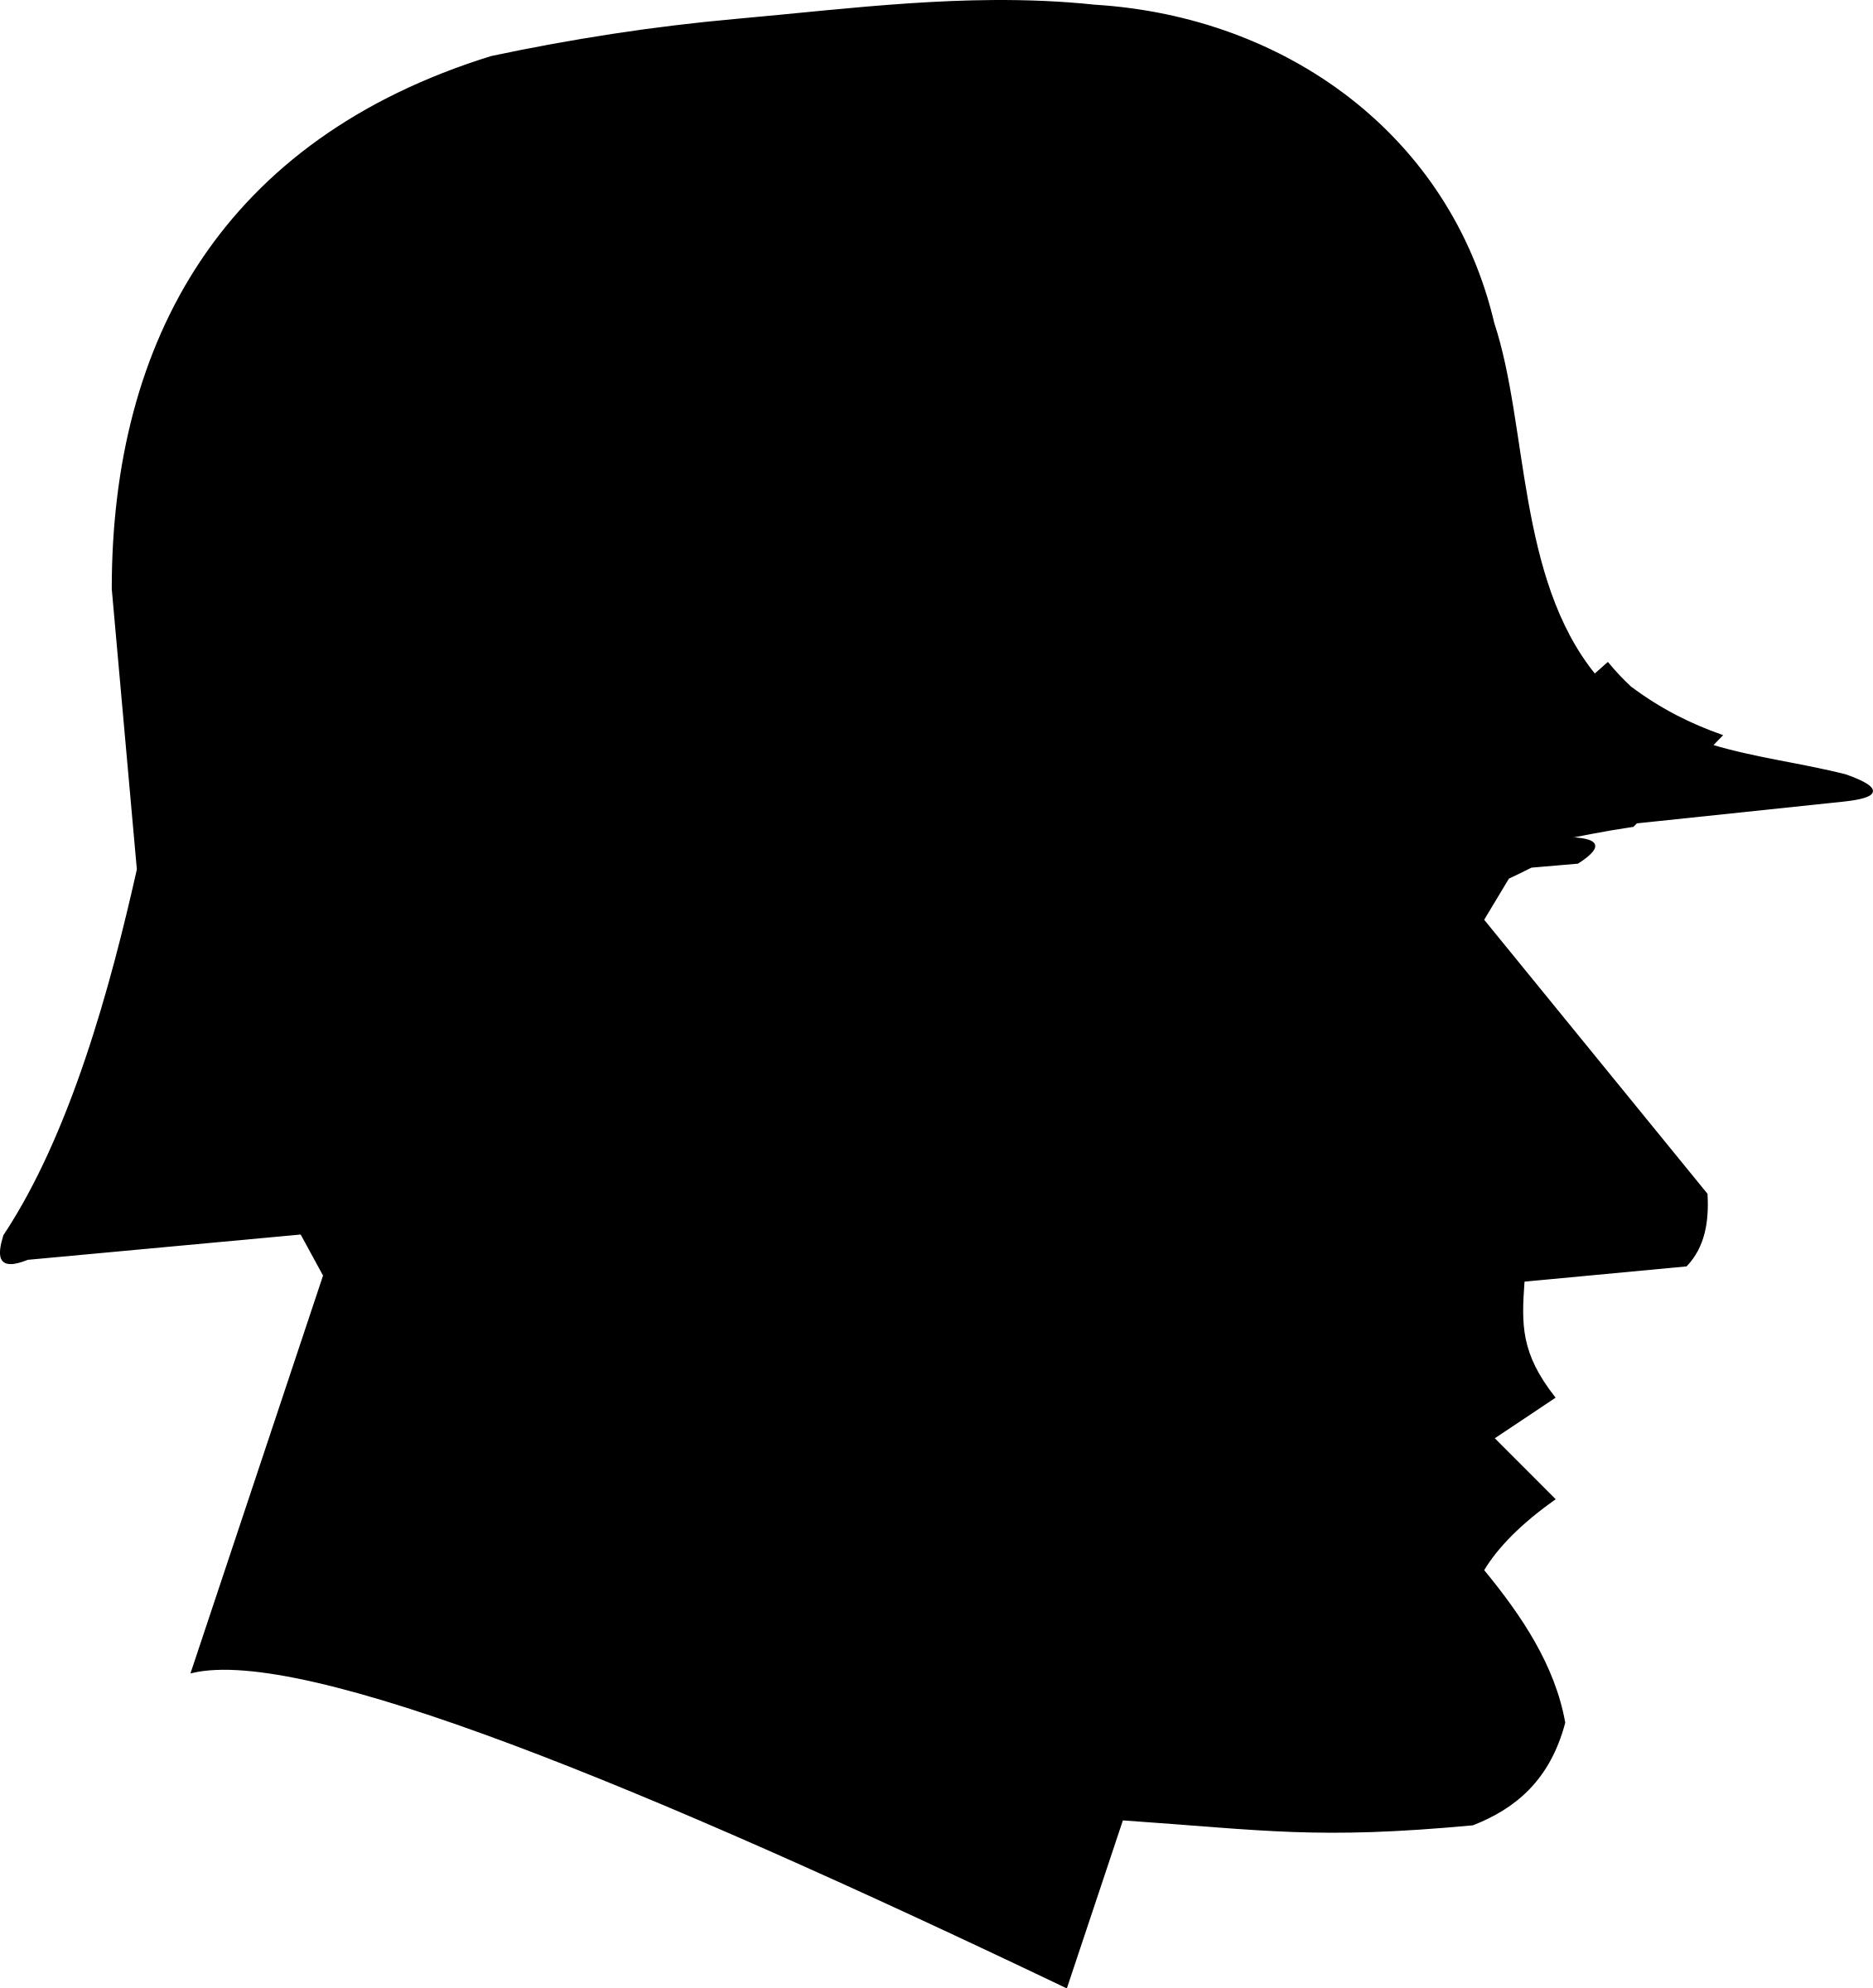 German World War 2 Soldier Silhouette PNG icons